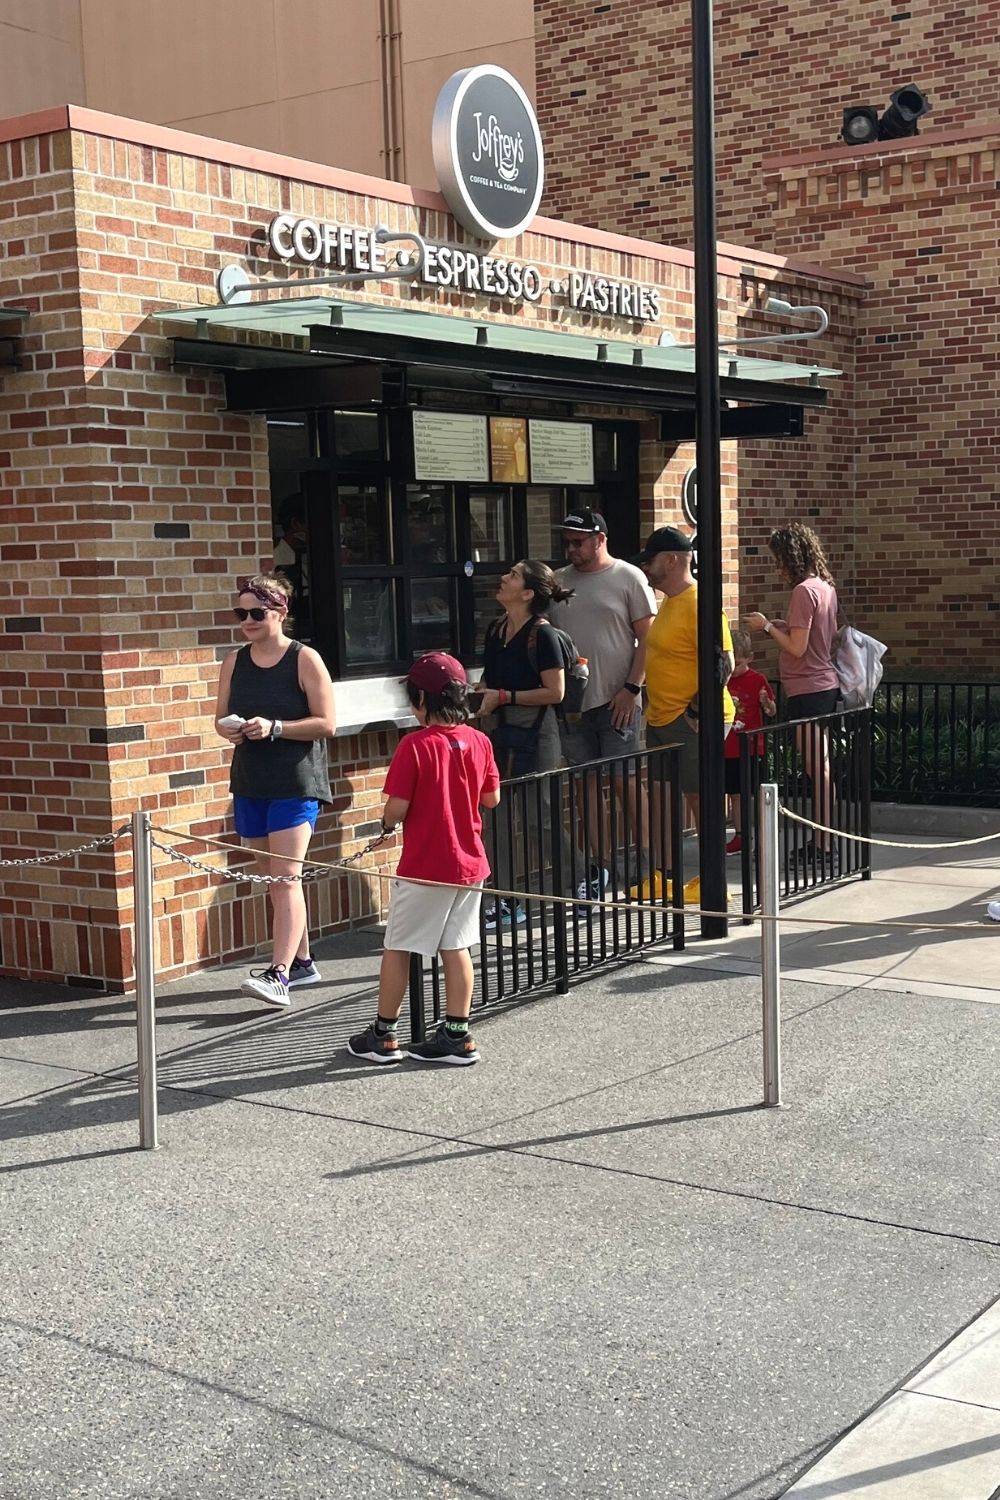 Joffrey's kiosk at Hollywood Studios, with people waiting in line for coffee, pastries, etc.